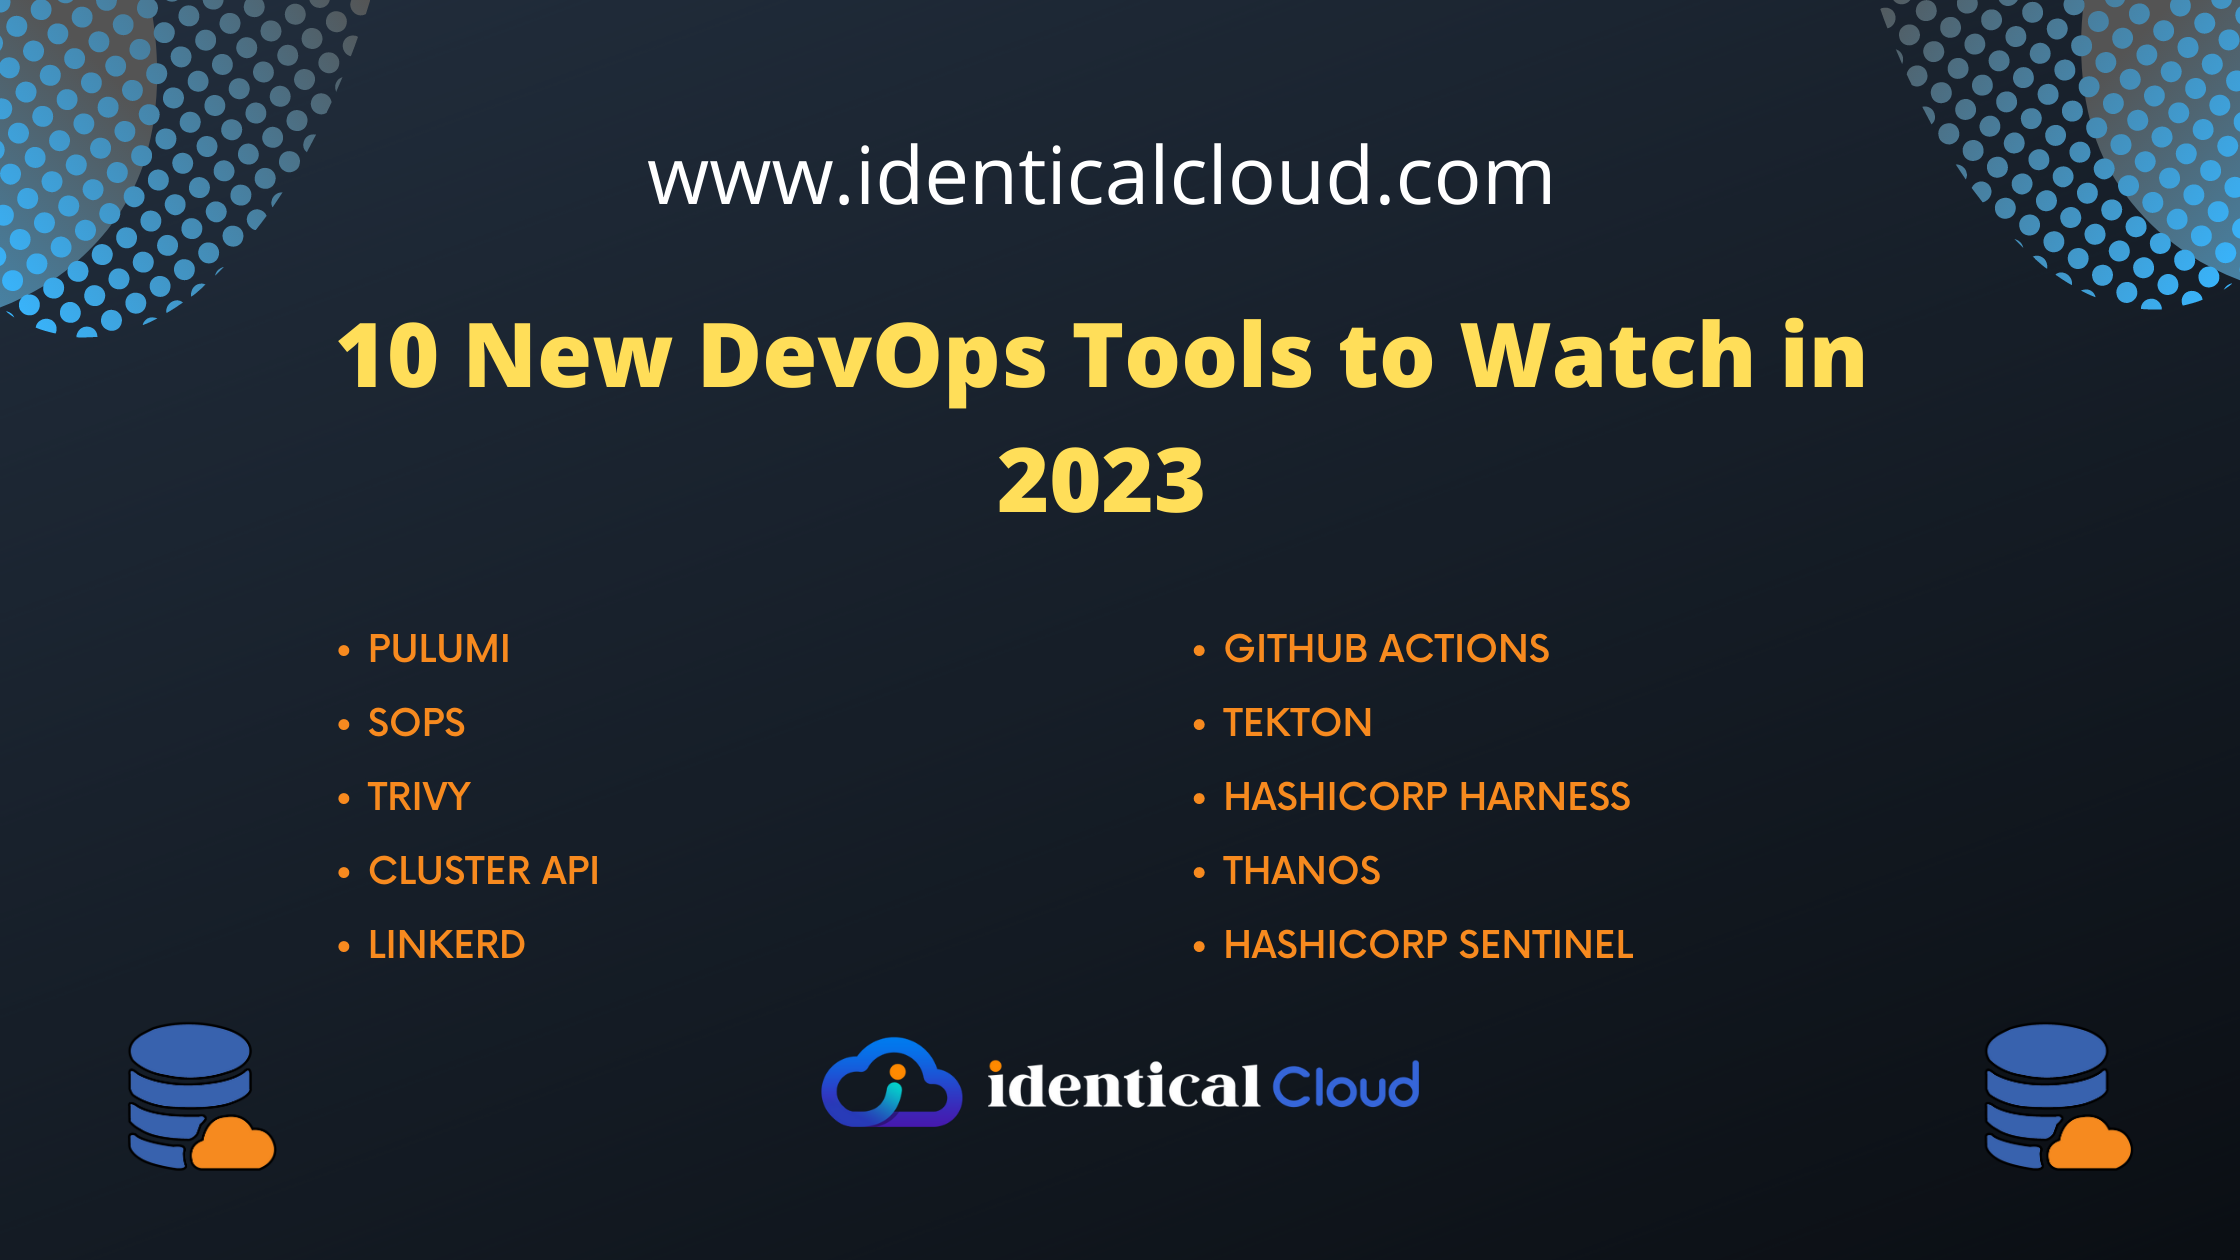 10 New DevOps Tools to Watch in 2023 - identicalcloud.com